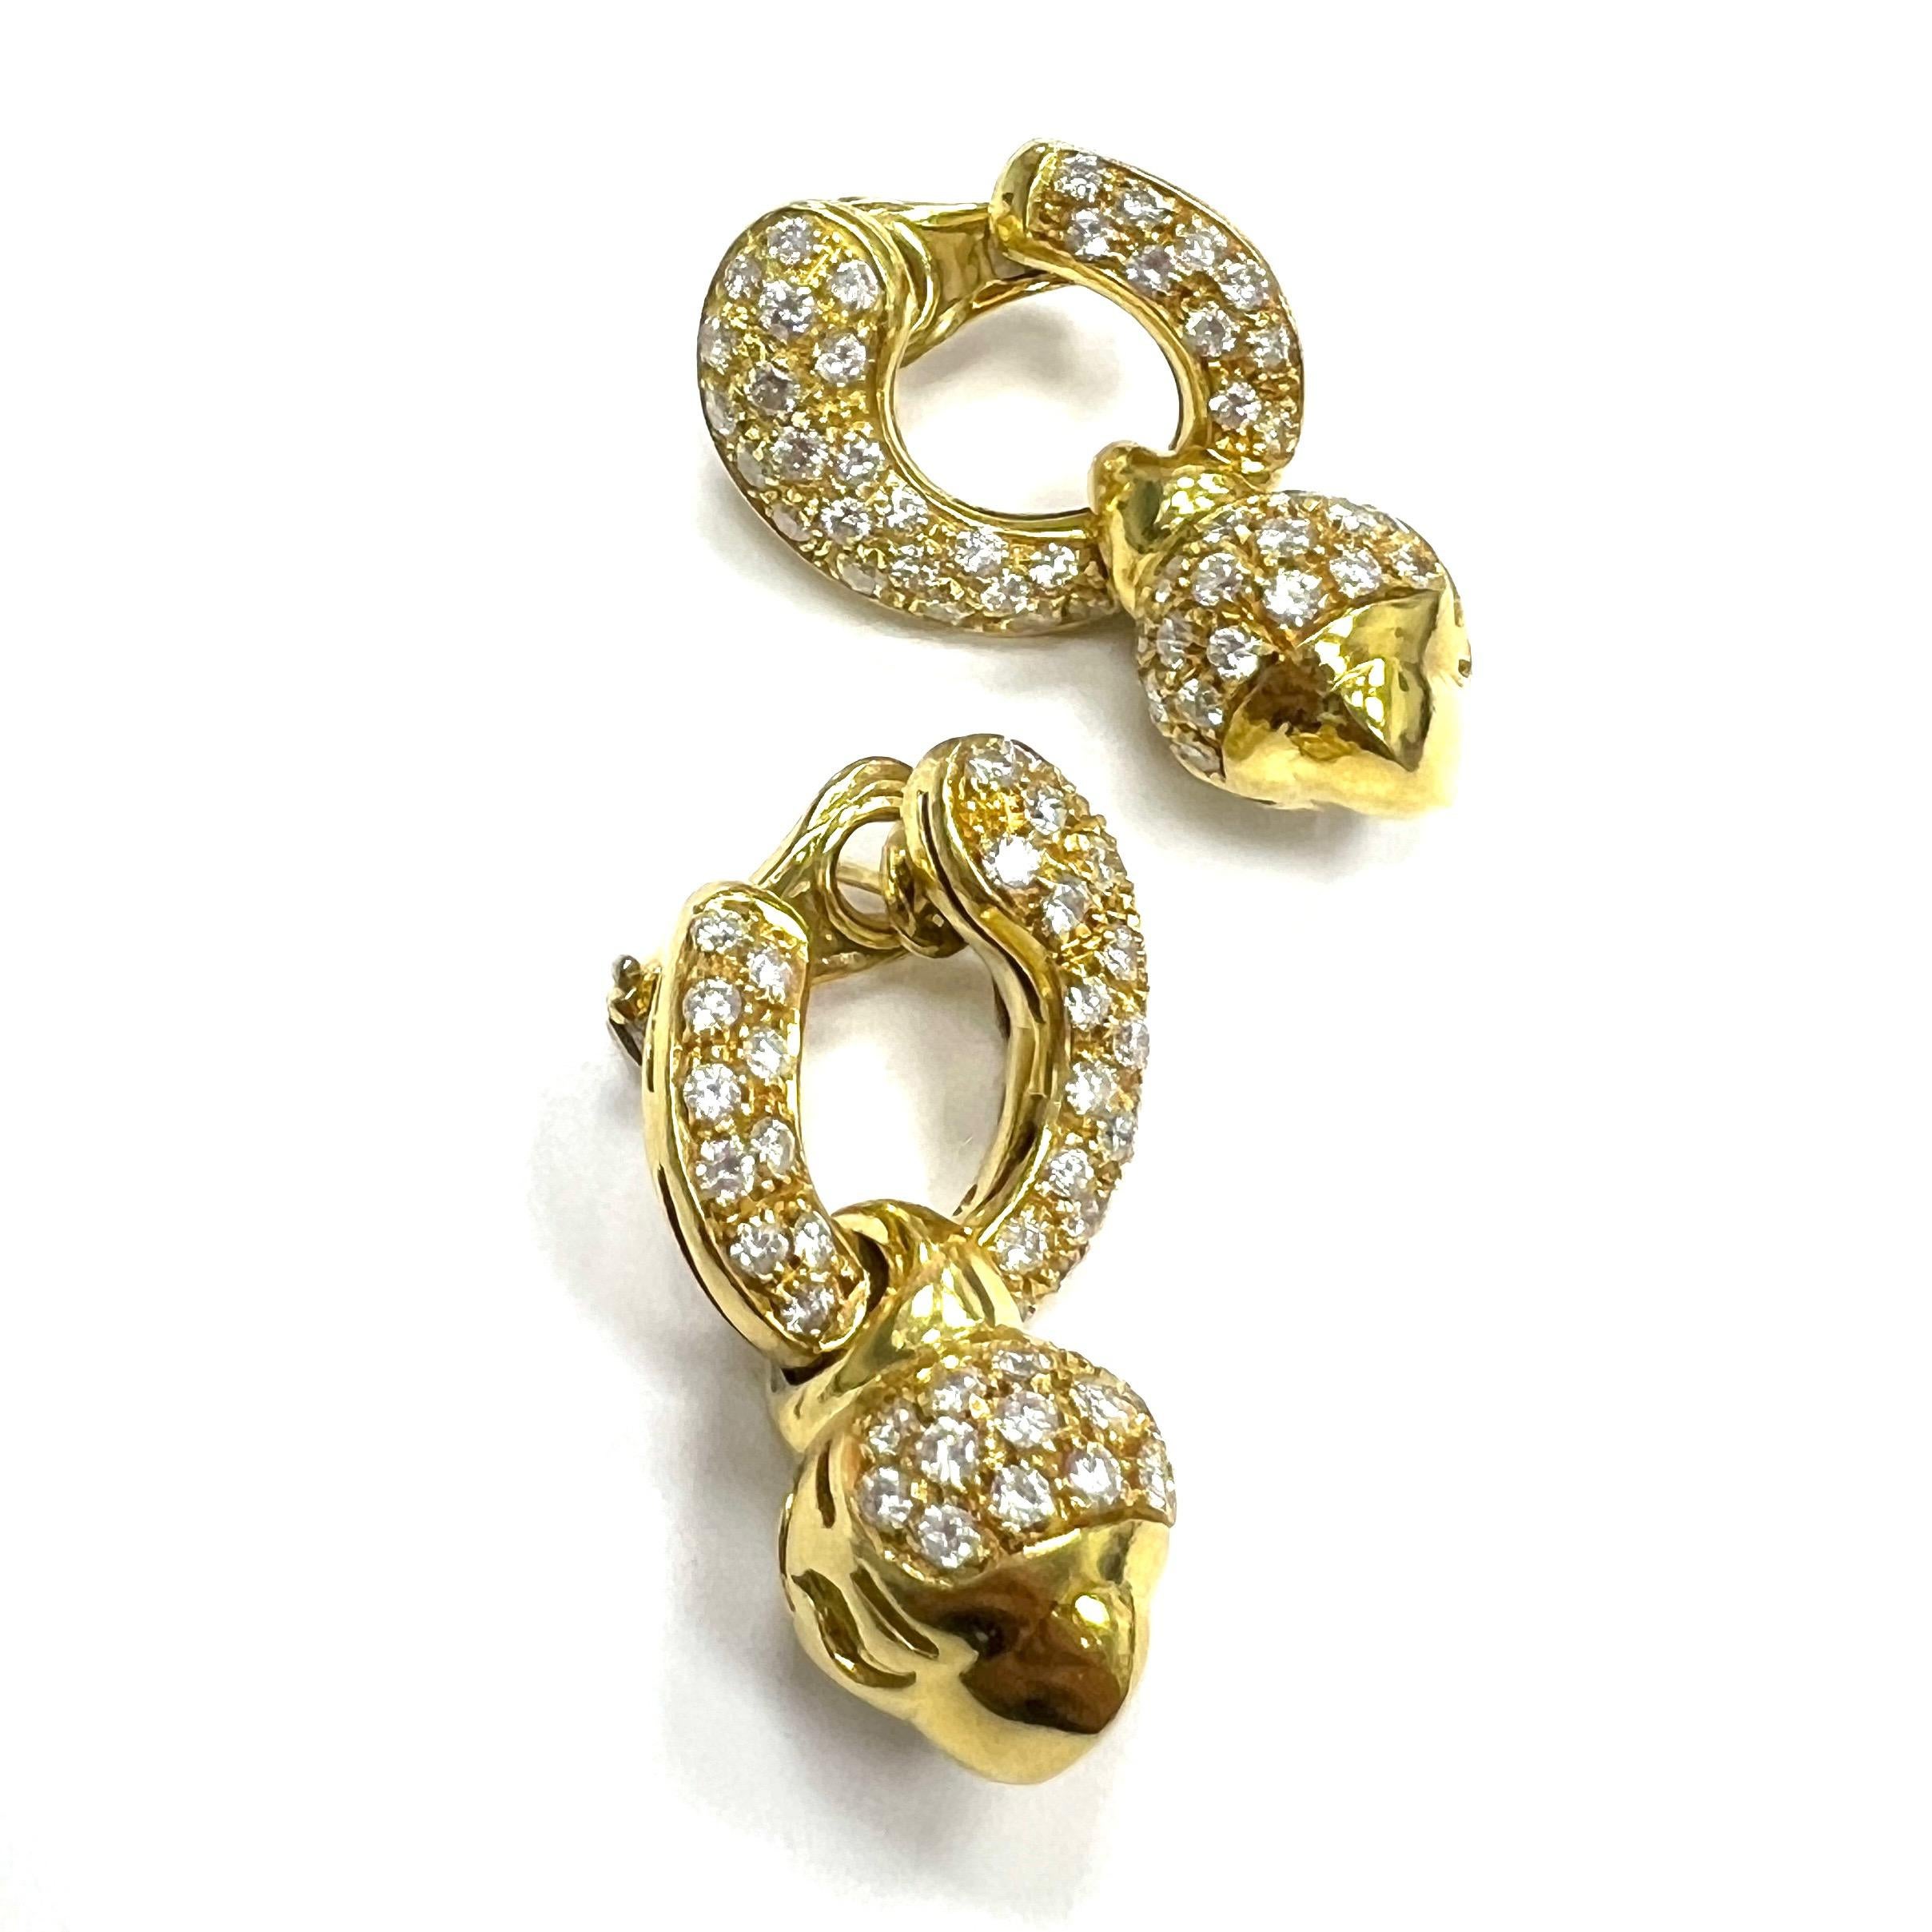 Bvlgari-Styled 18k Diamond Yellow Gold Earrings In Excellent Condition For Sale In New York, NY